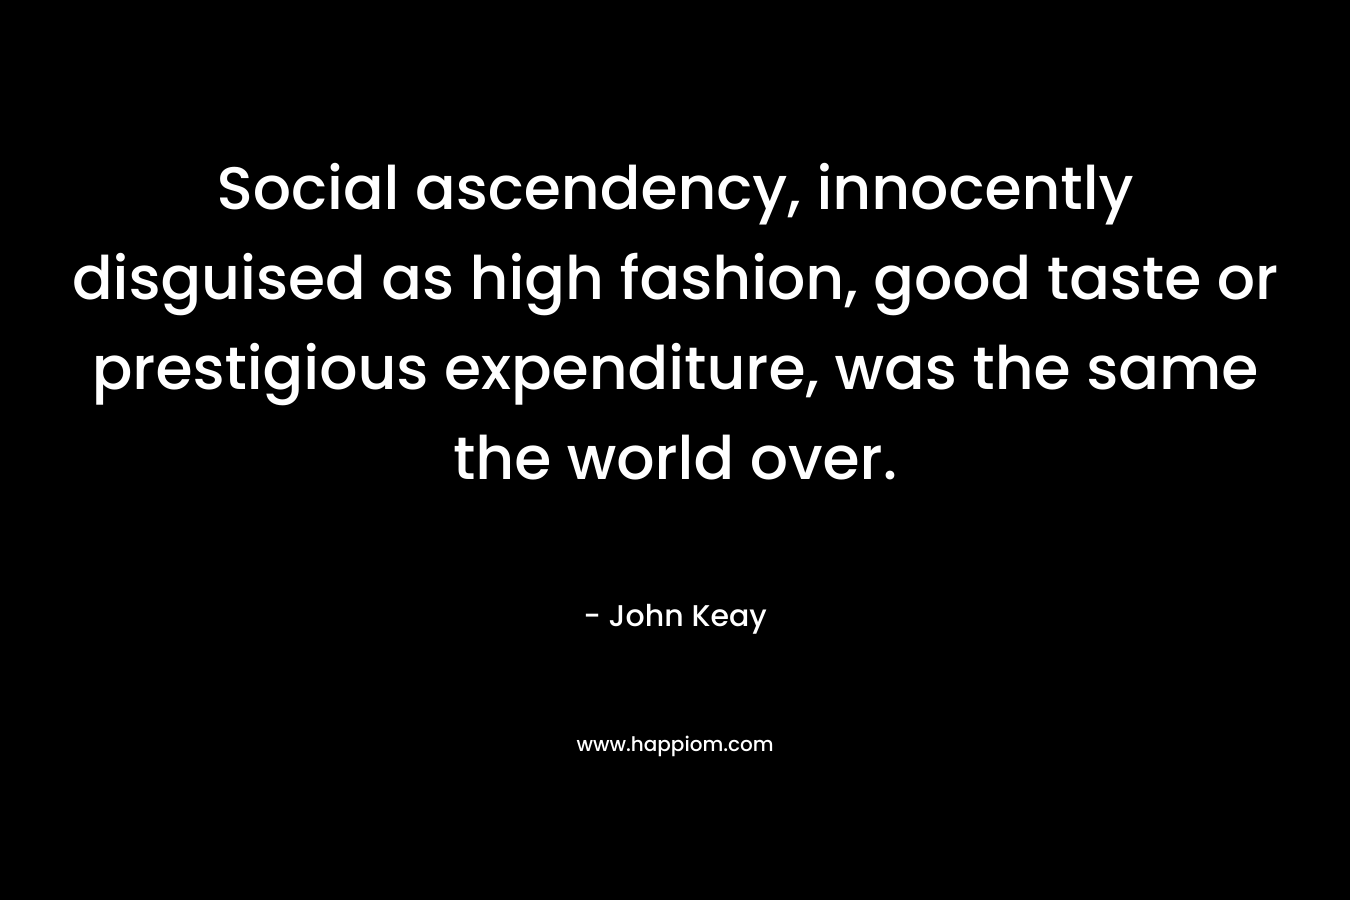 Social ascendency, innocently disguised as high fashion, good taste or prestigious expenditure, was the same the world over. – John Keay